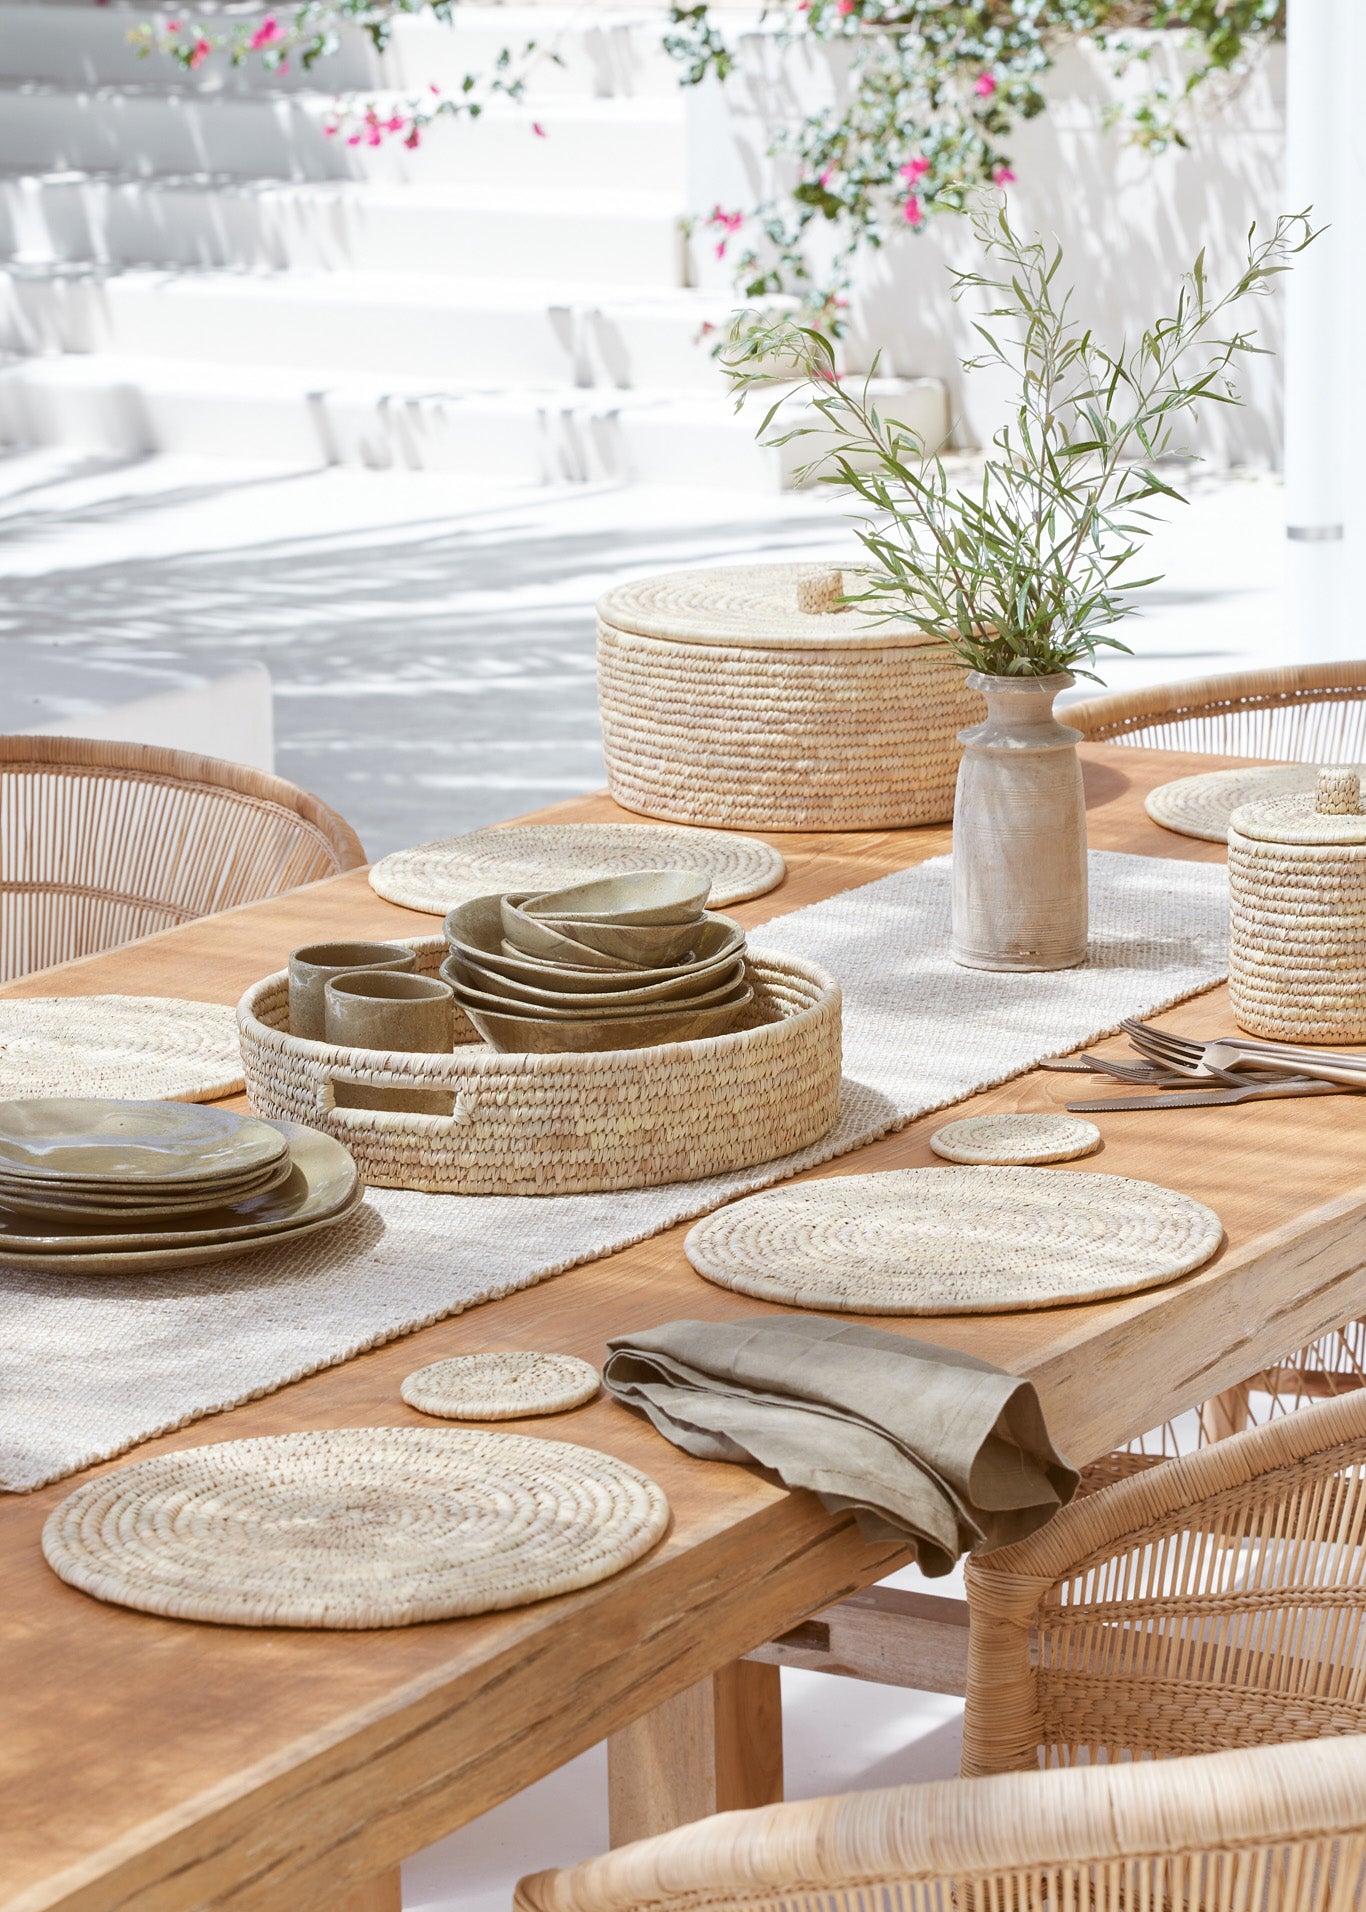 Inspiration | 10 Summer Table Styling Ideas